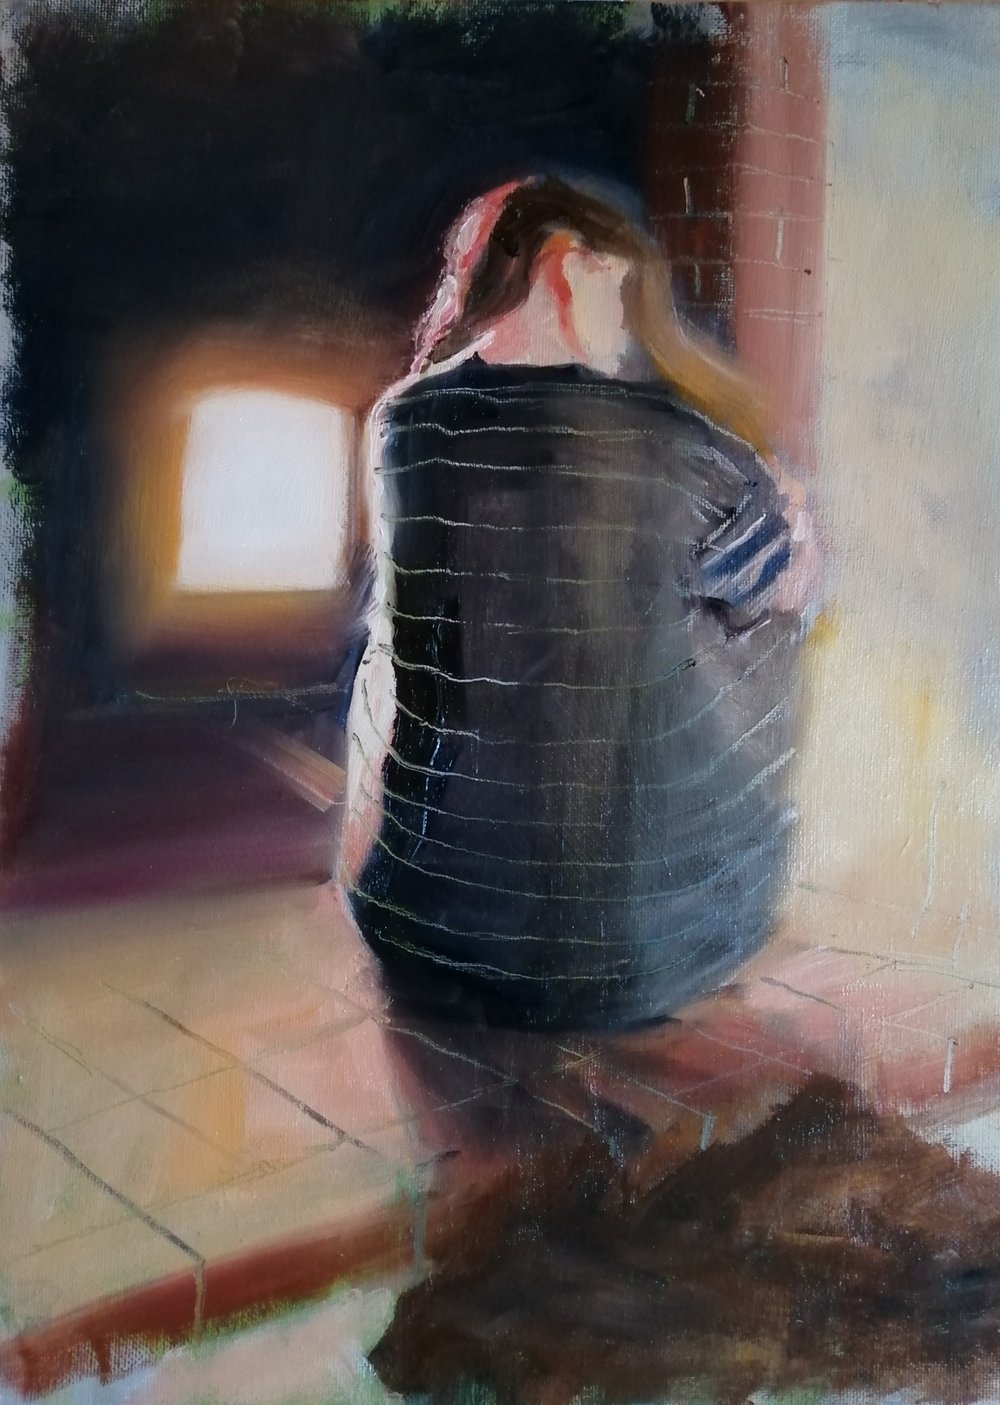  Drying her hair  Oil on board 30x40cm  £450 